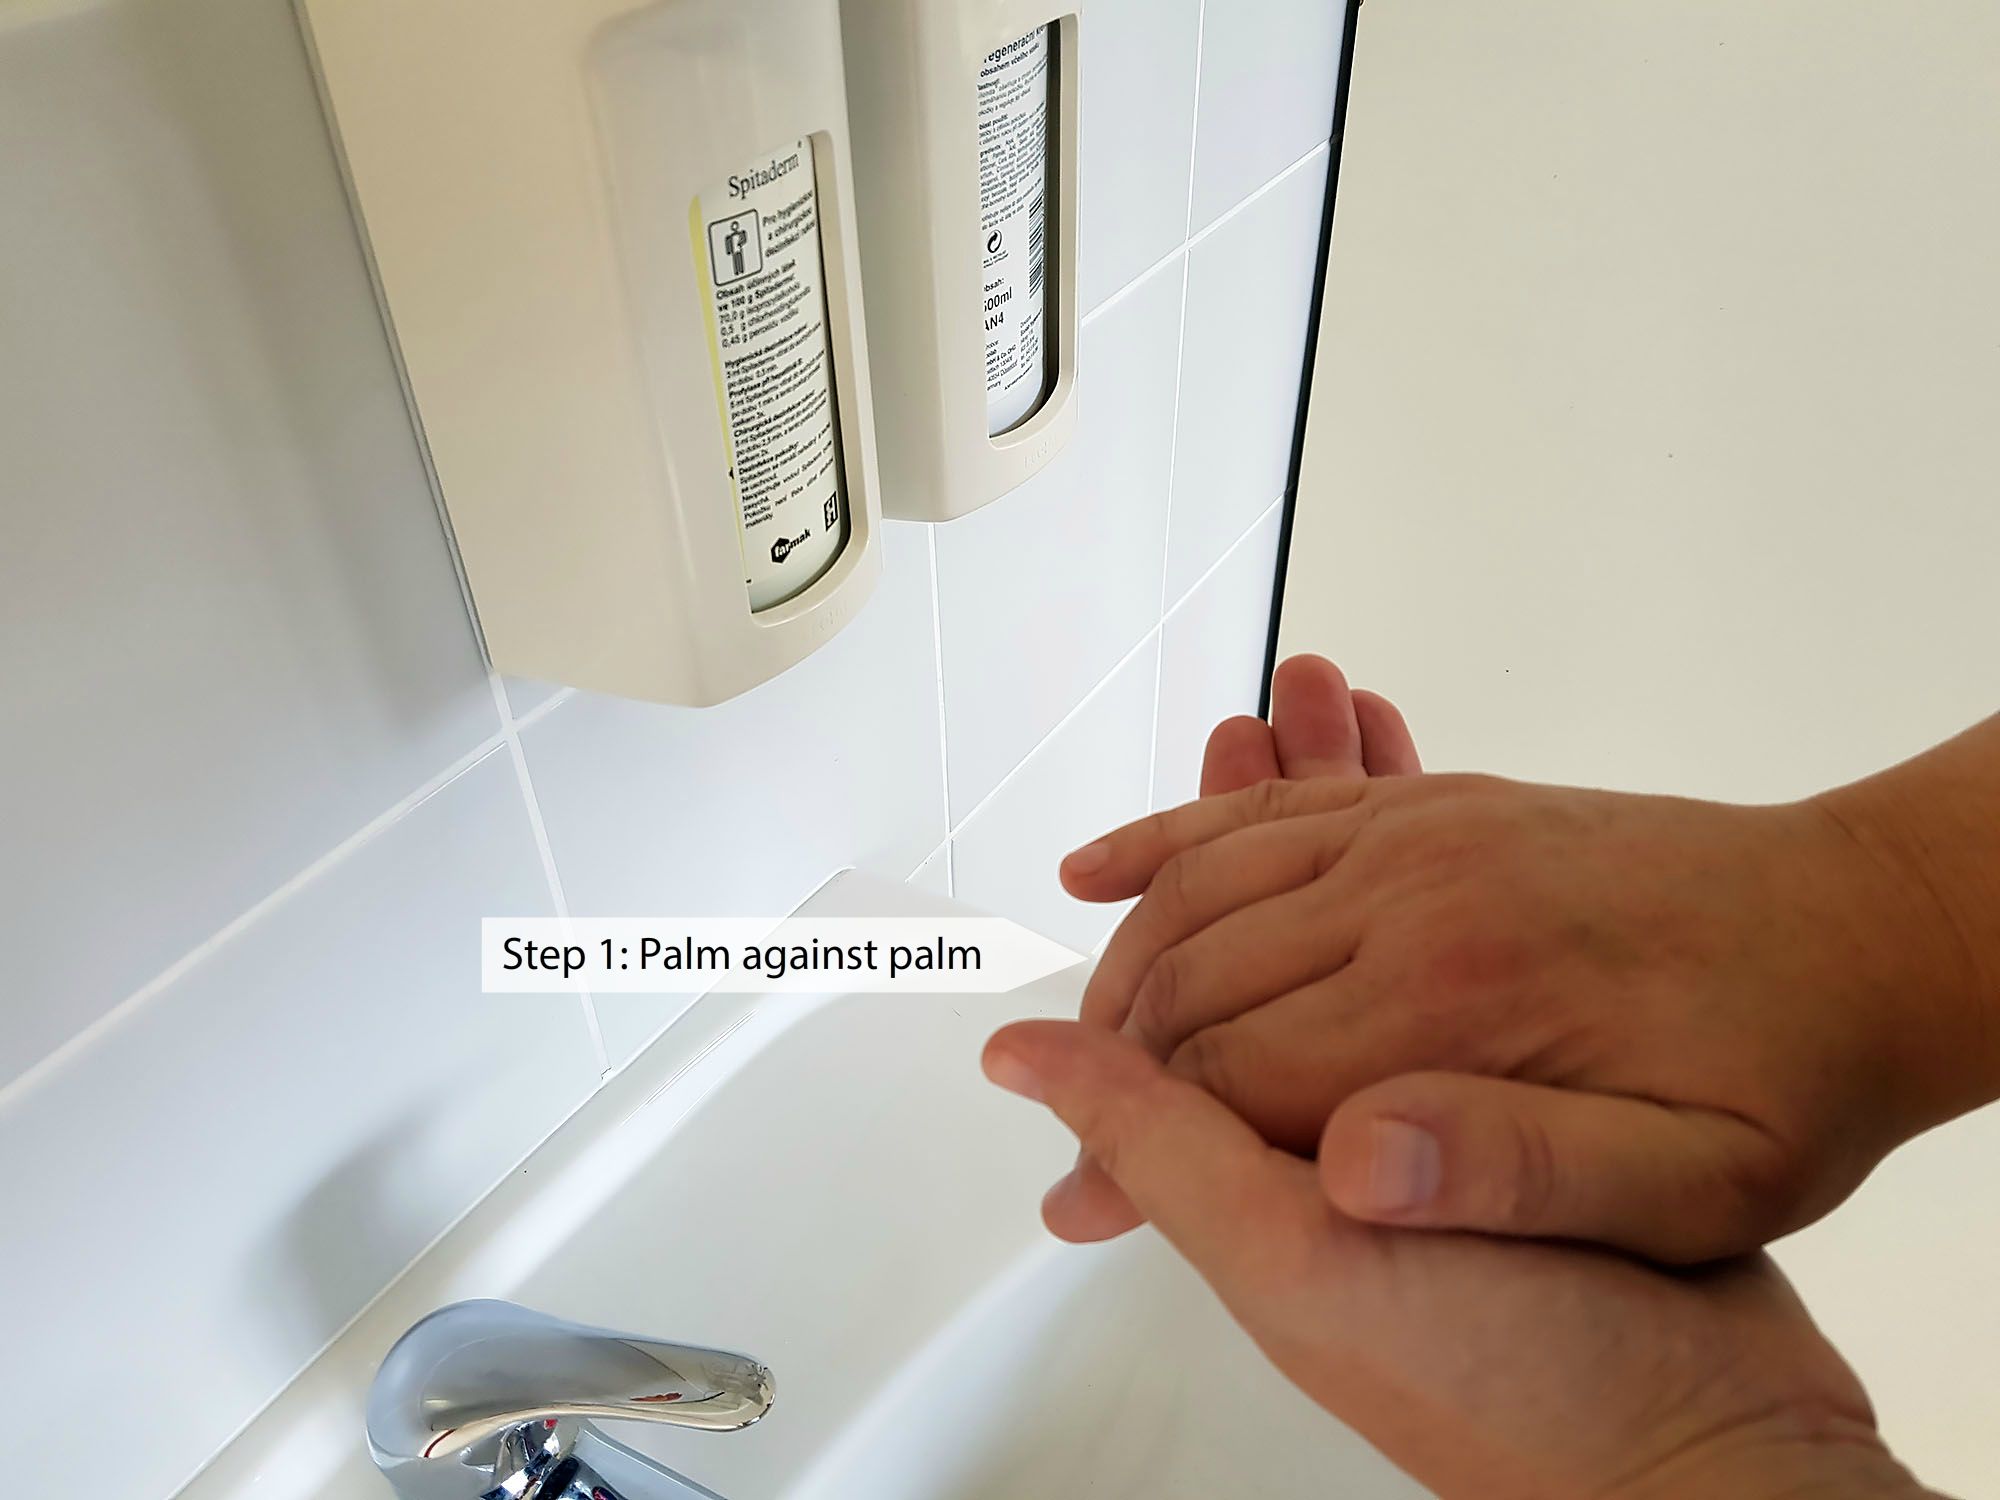 Procedure for rubbing the disinfectant solution during hygienic hand disinfection (Step 1)